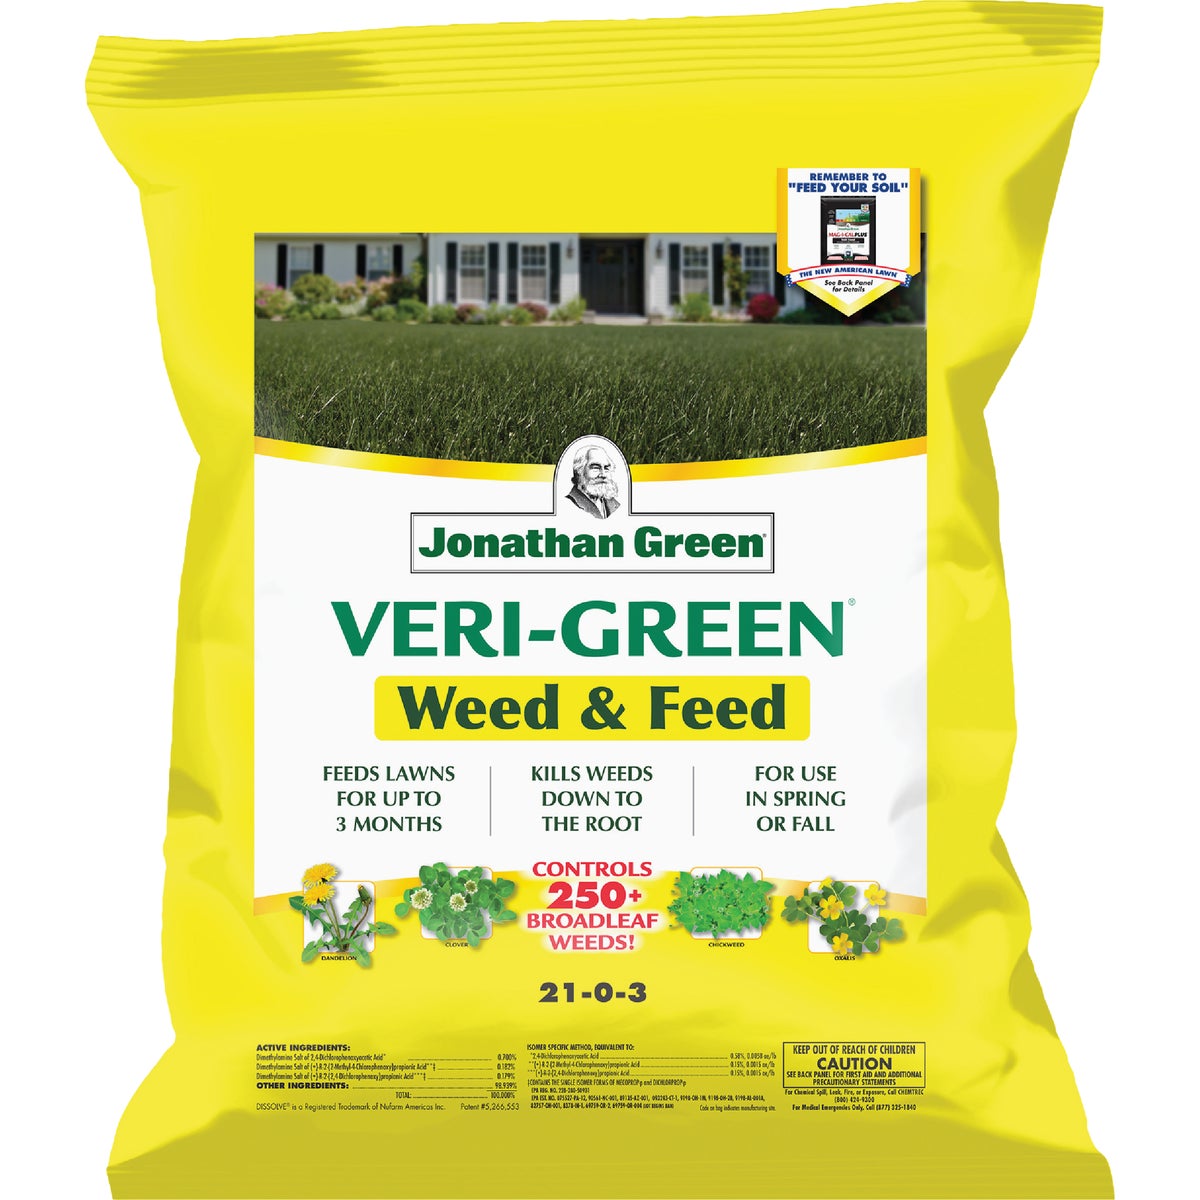 Jonathan Green Veri-Green Weed & Feed 16 Lb. 5000 Sq. Ft. 21-0-3 Lawn Fertilizer with Weed Killer